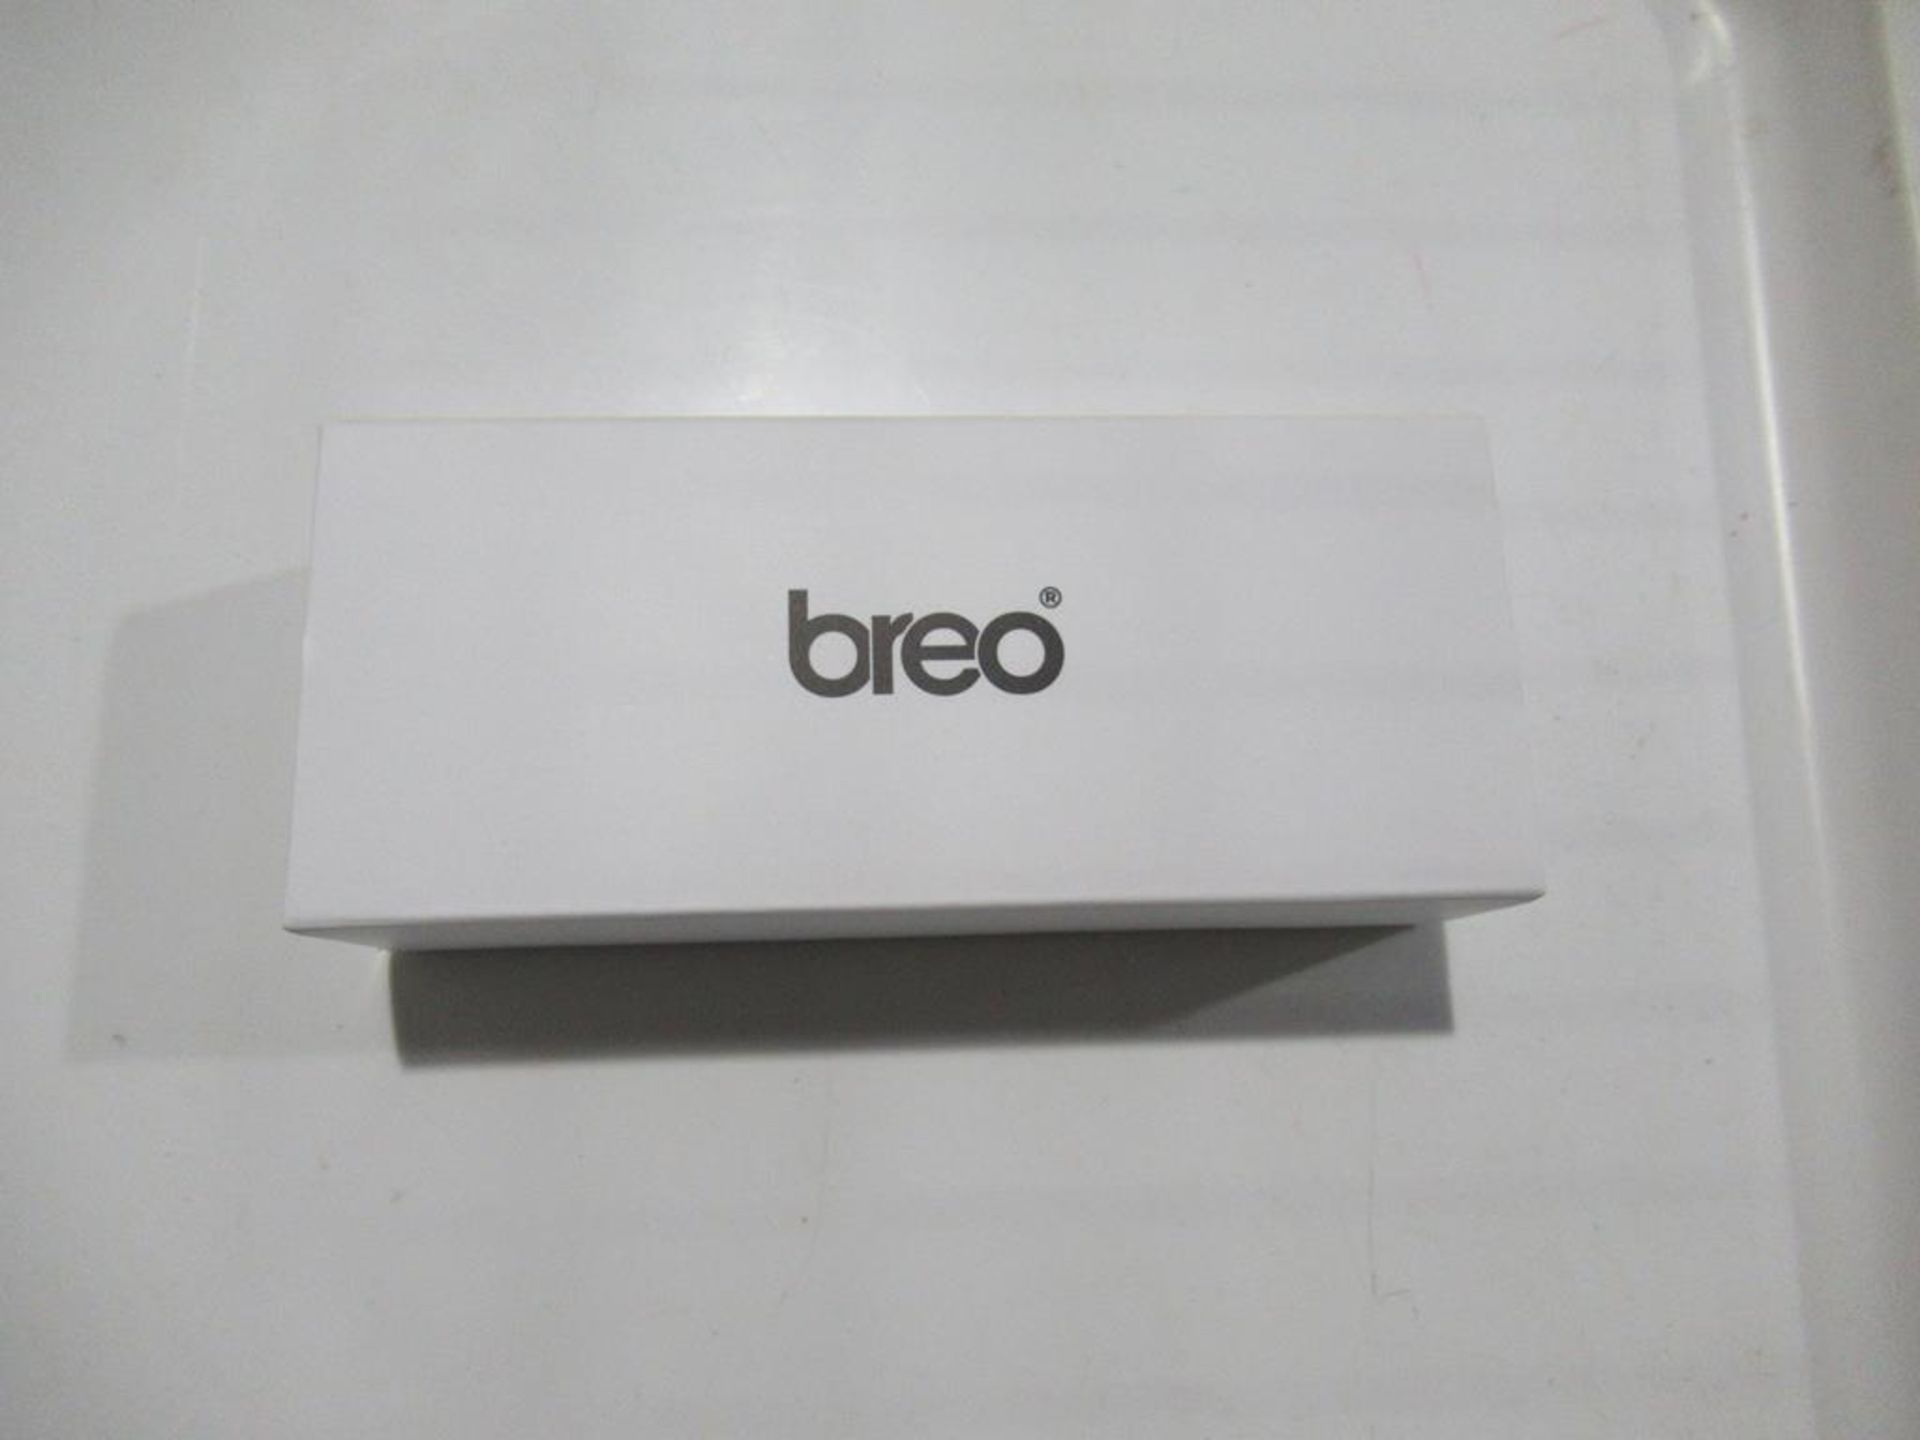 5x Breo sunglasses total approx RP £140